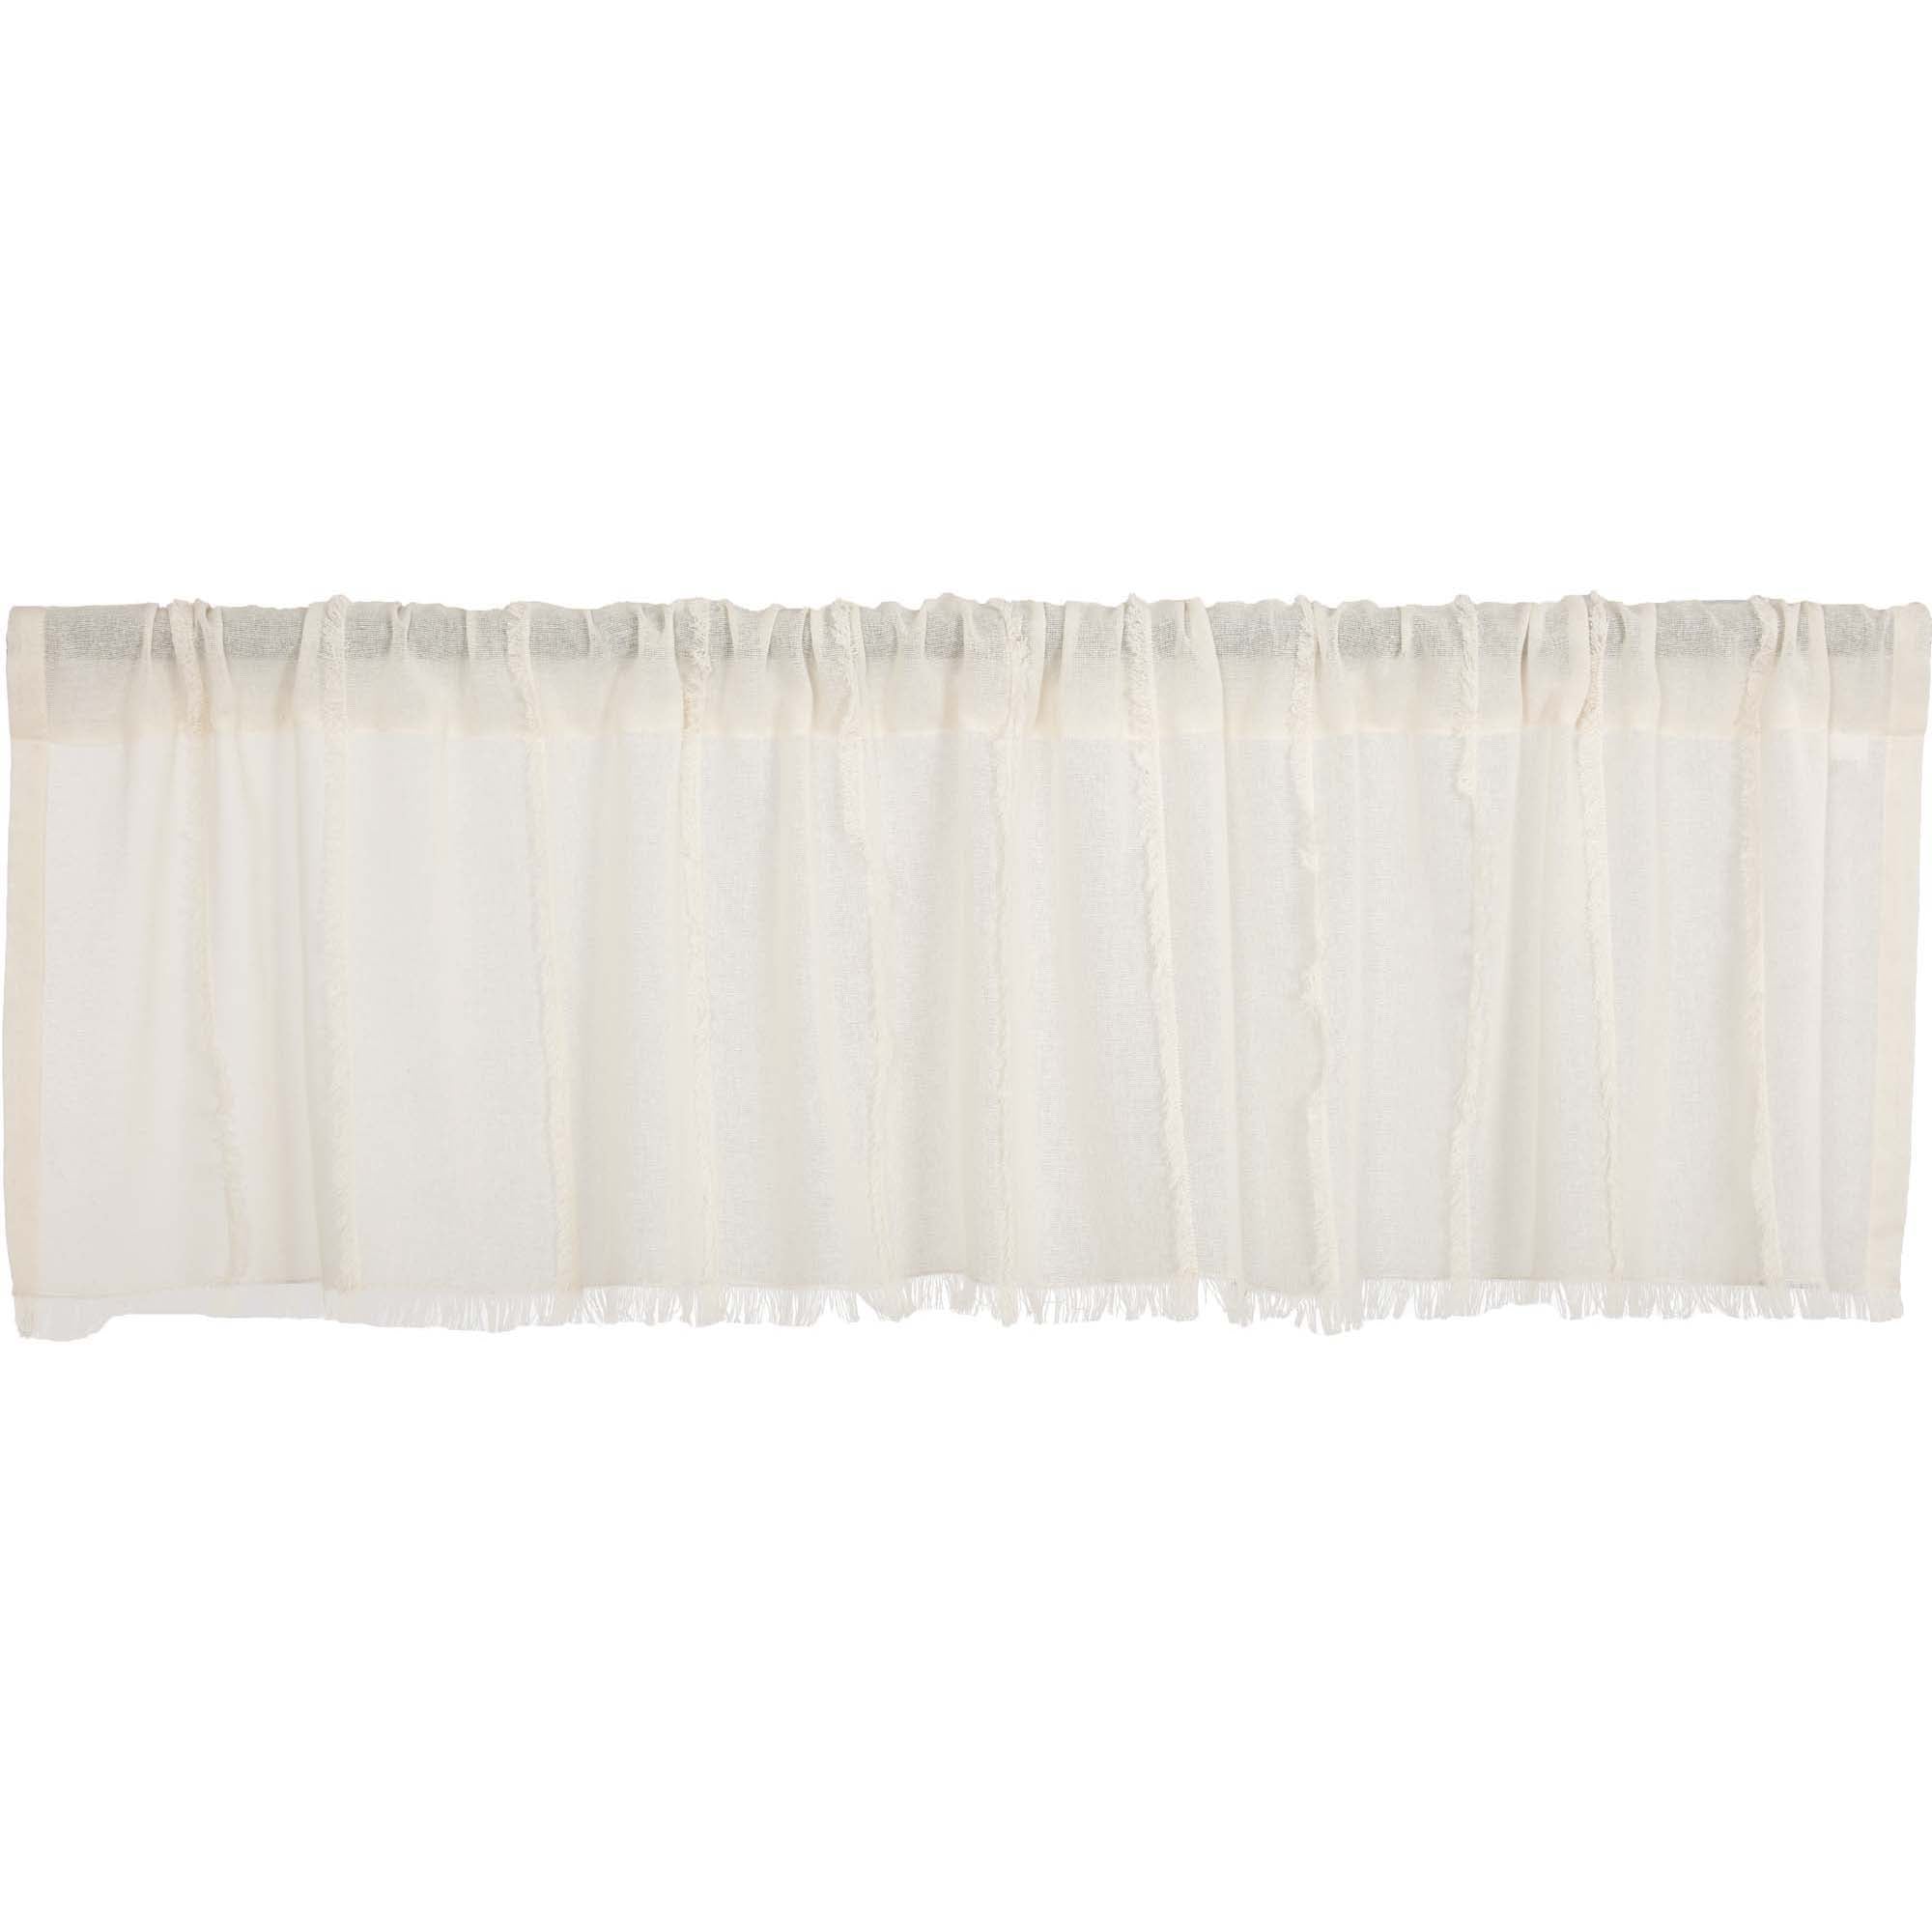 April & Olive Tobacco Cloth Antique White Patchwork Valance 16x60 By VHC Brands